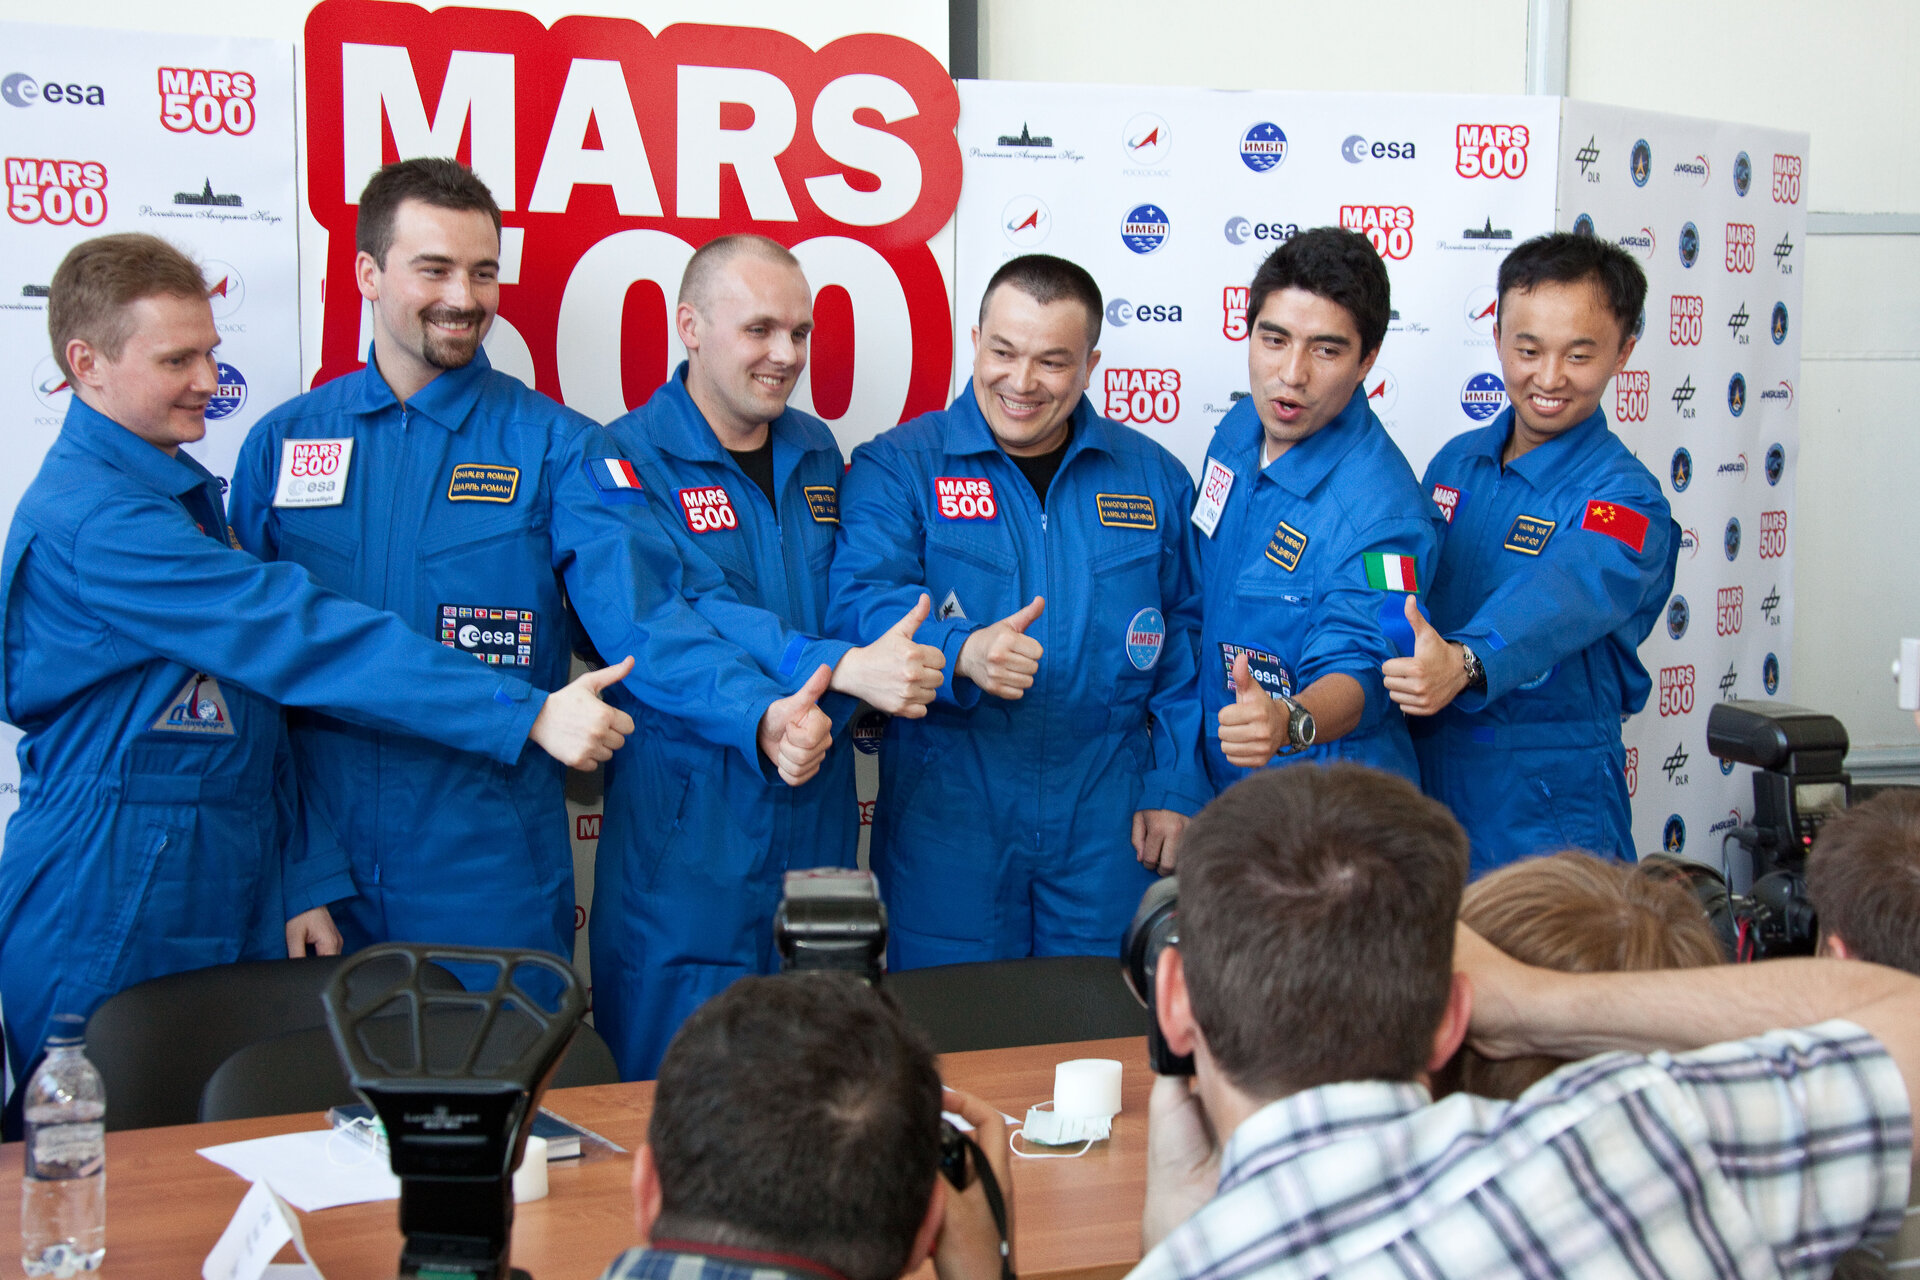 Crew of the Mars500 experiment